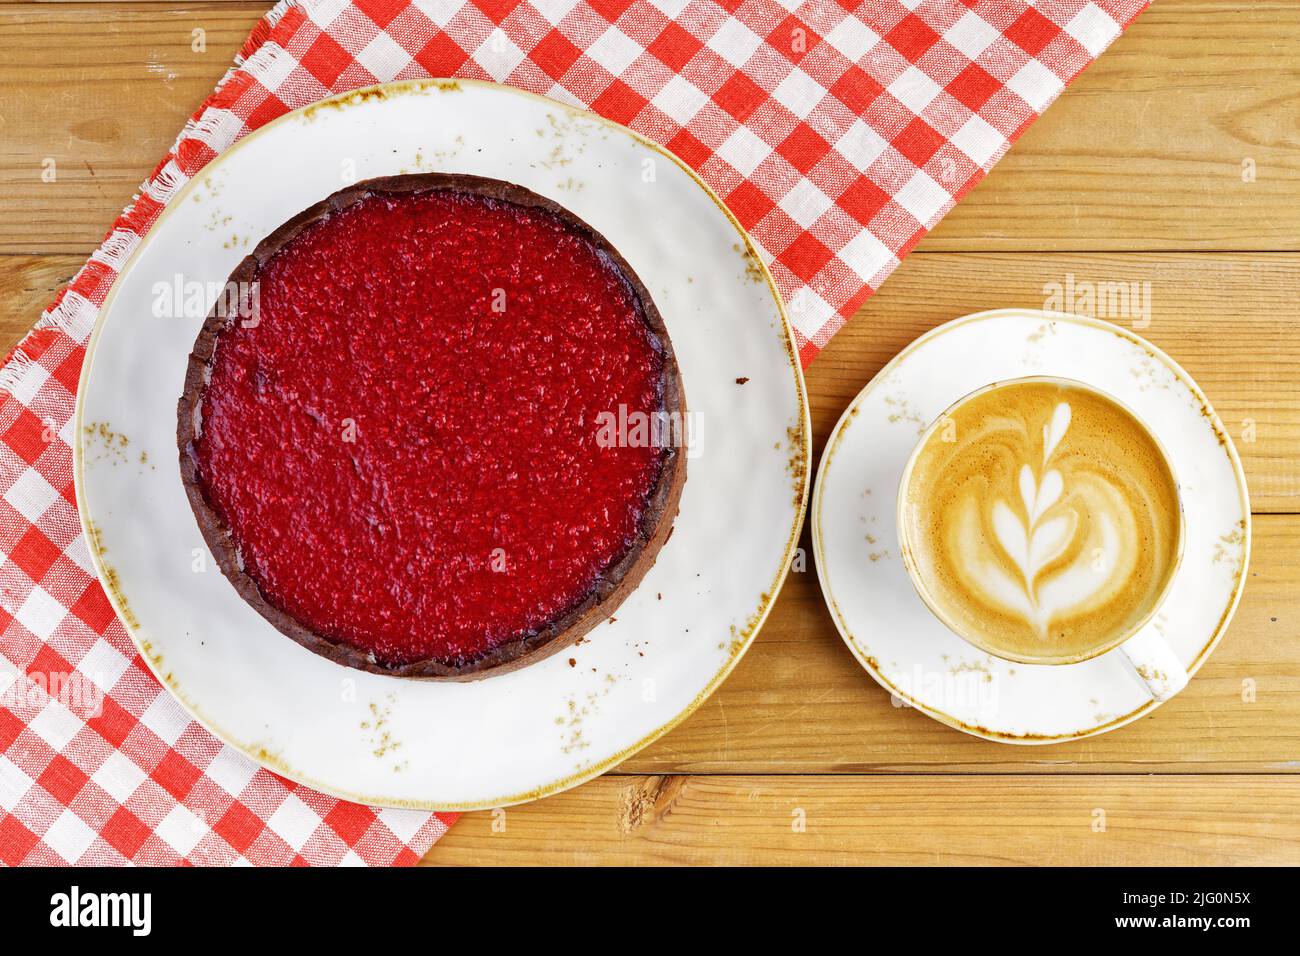 Homemade raspberry and strawberry cheesecake and cup of coffee cappuccino on wooden table. Top view. Stock Photo